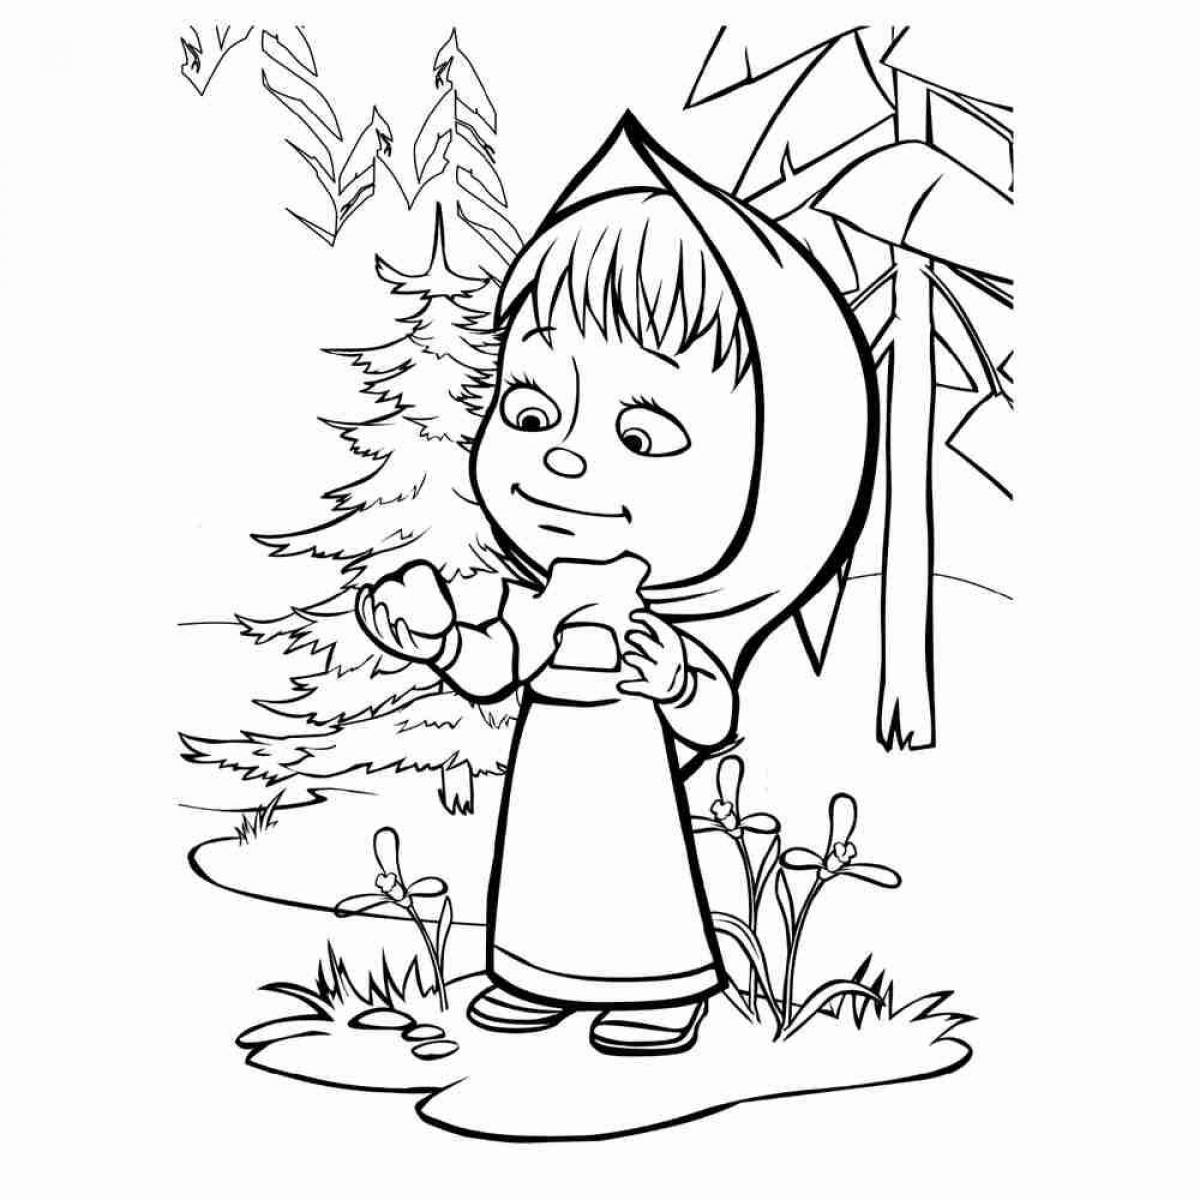 Joyful masha and the bear coloring pages for kids